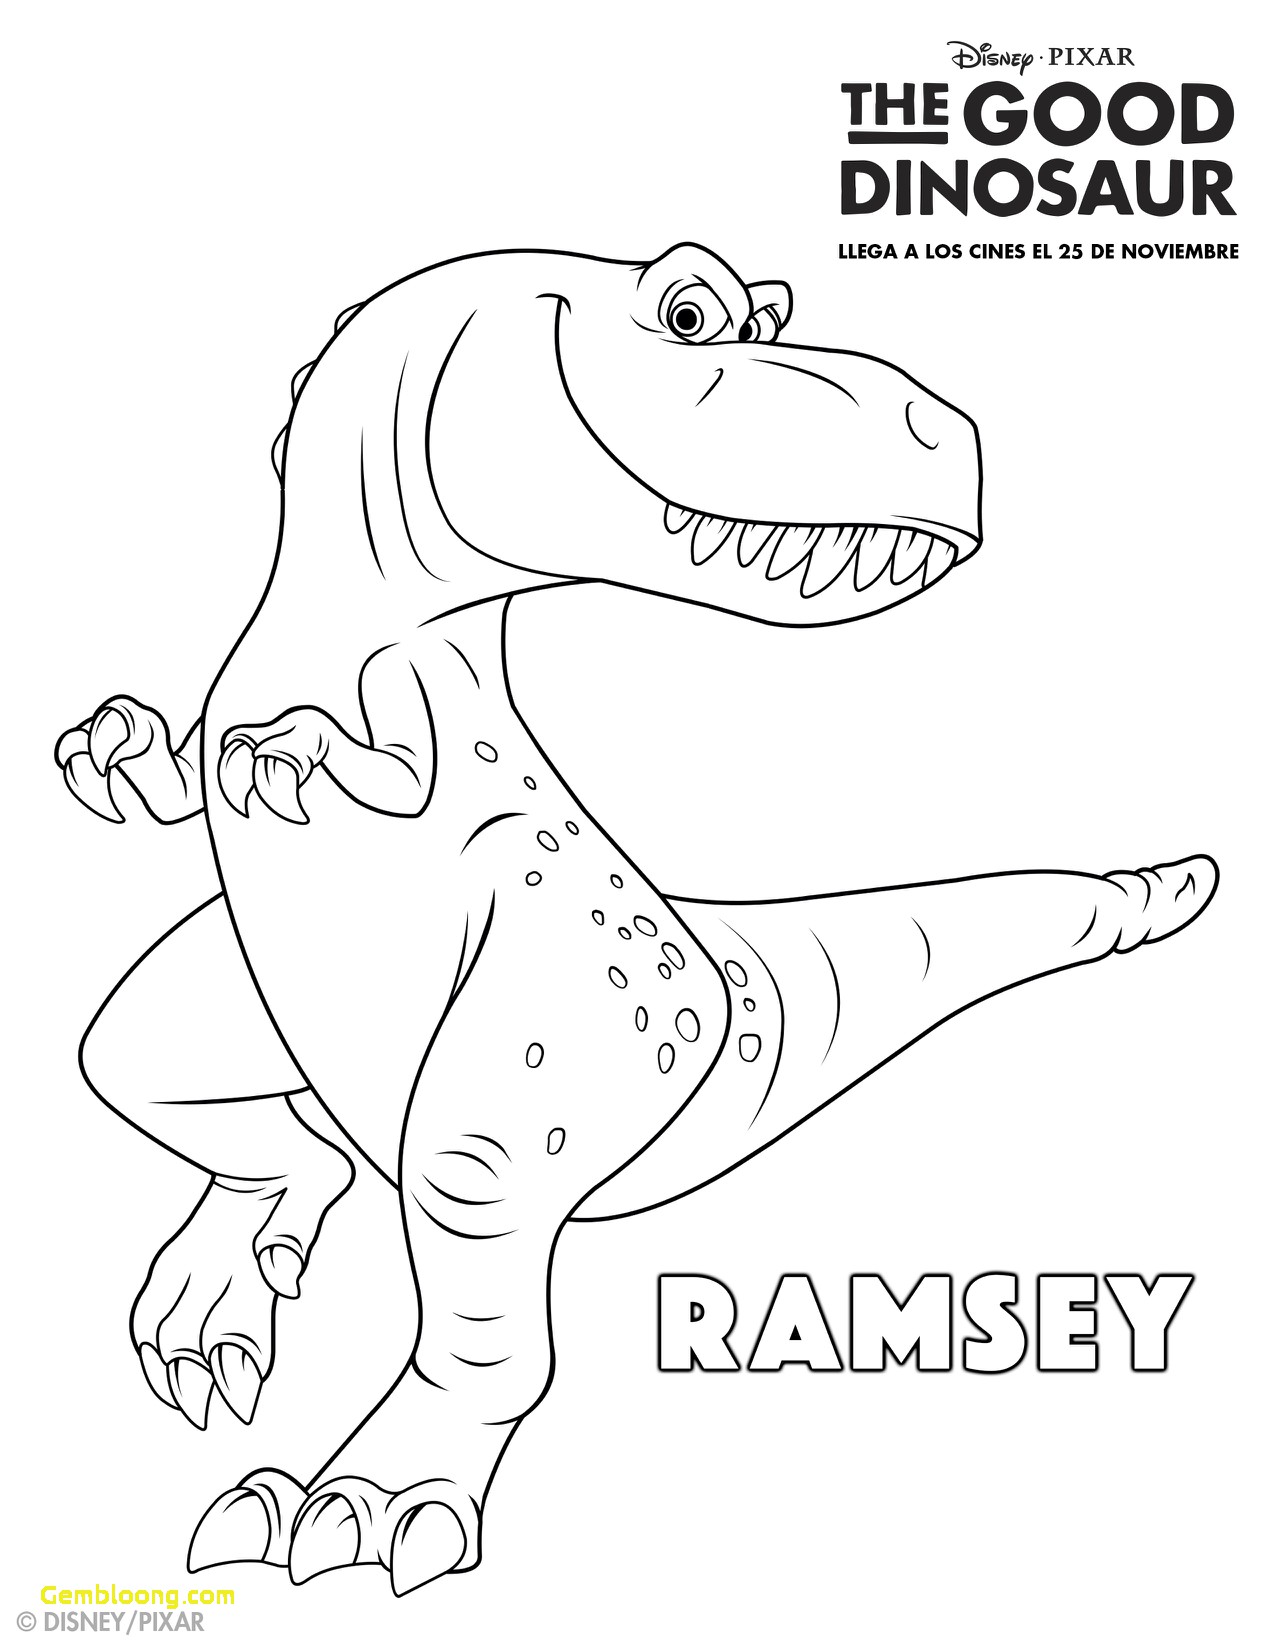 The Good Dinosaur Coloring Pages Ramsey coloring pages Wallpaper